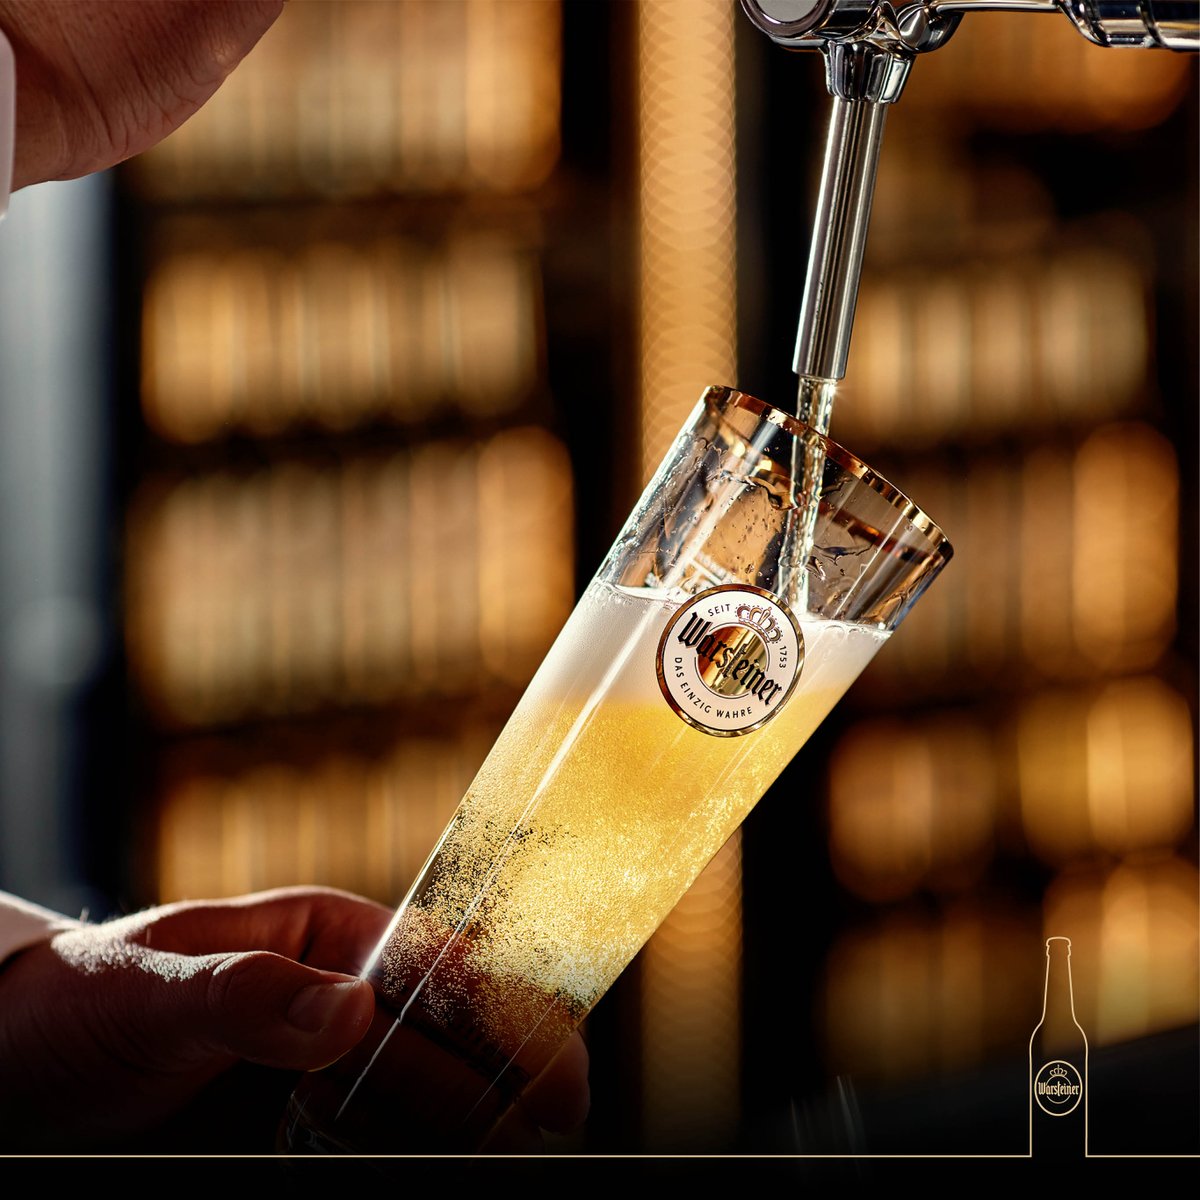 Where our beers come to life. #warsteinerusa